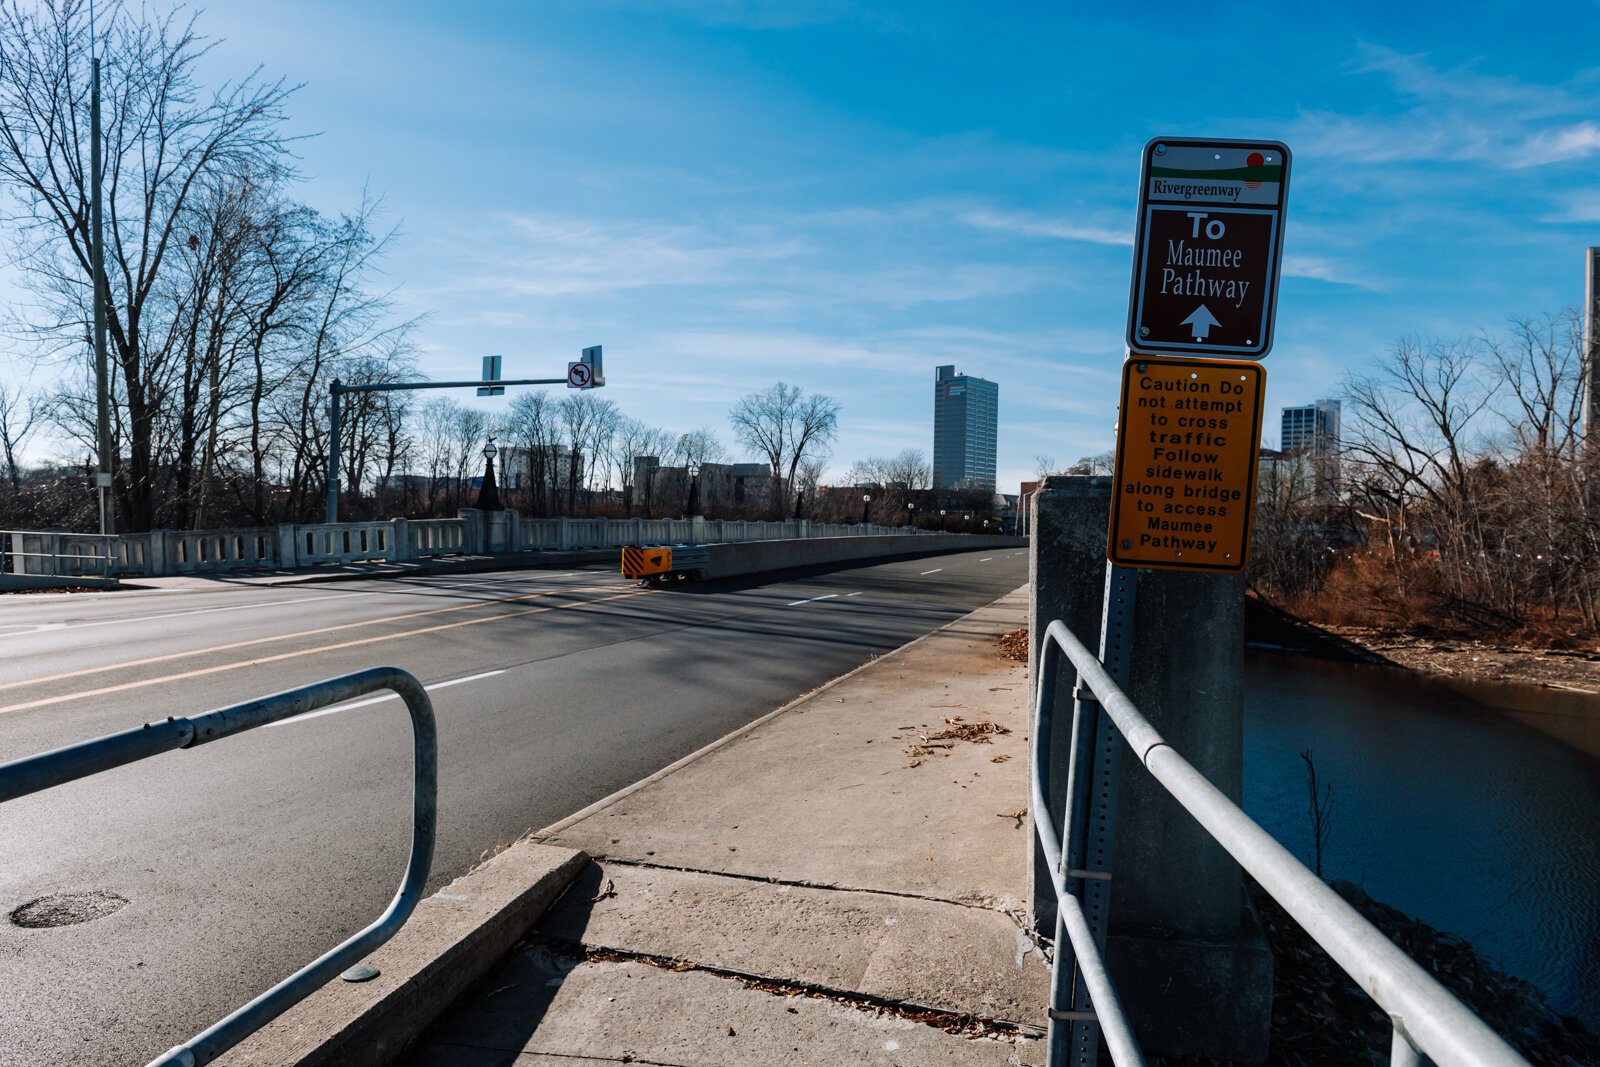 Navigating the bridge and area around Columbia Avenue & Saint Joe Boulevard can be very dangerous for anyone needing to use the bridge or access the Rivergreenway, due to the small sidewalks and the proximity of traffic.